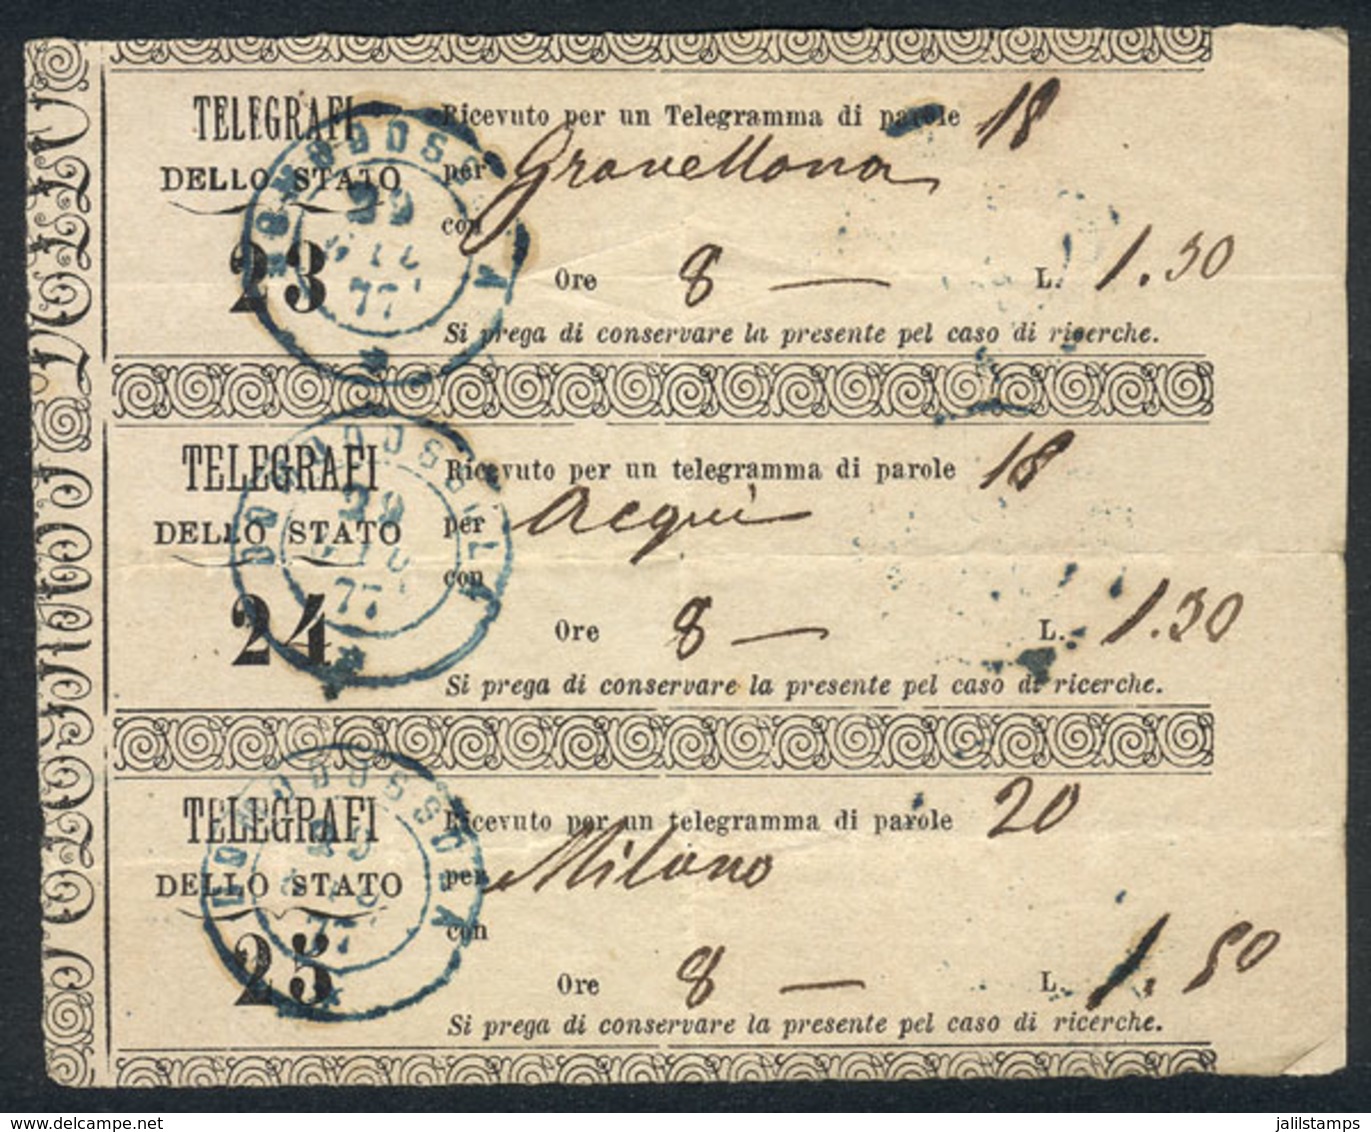 ITALY: 3 Receipts Of Telegrams Sent From DOMODOSSOLA To Different Towns On 29/JUL/1877, VF Quality, Rare! - Non Classés